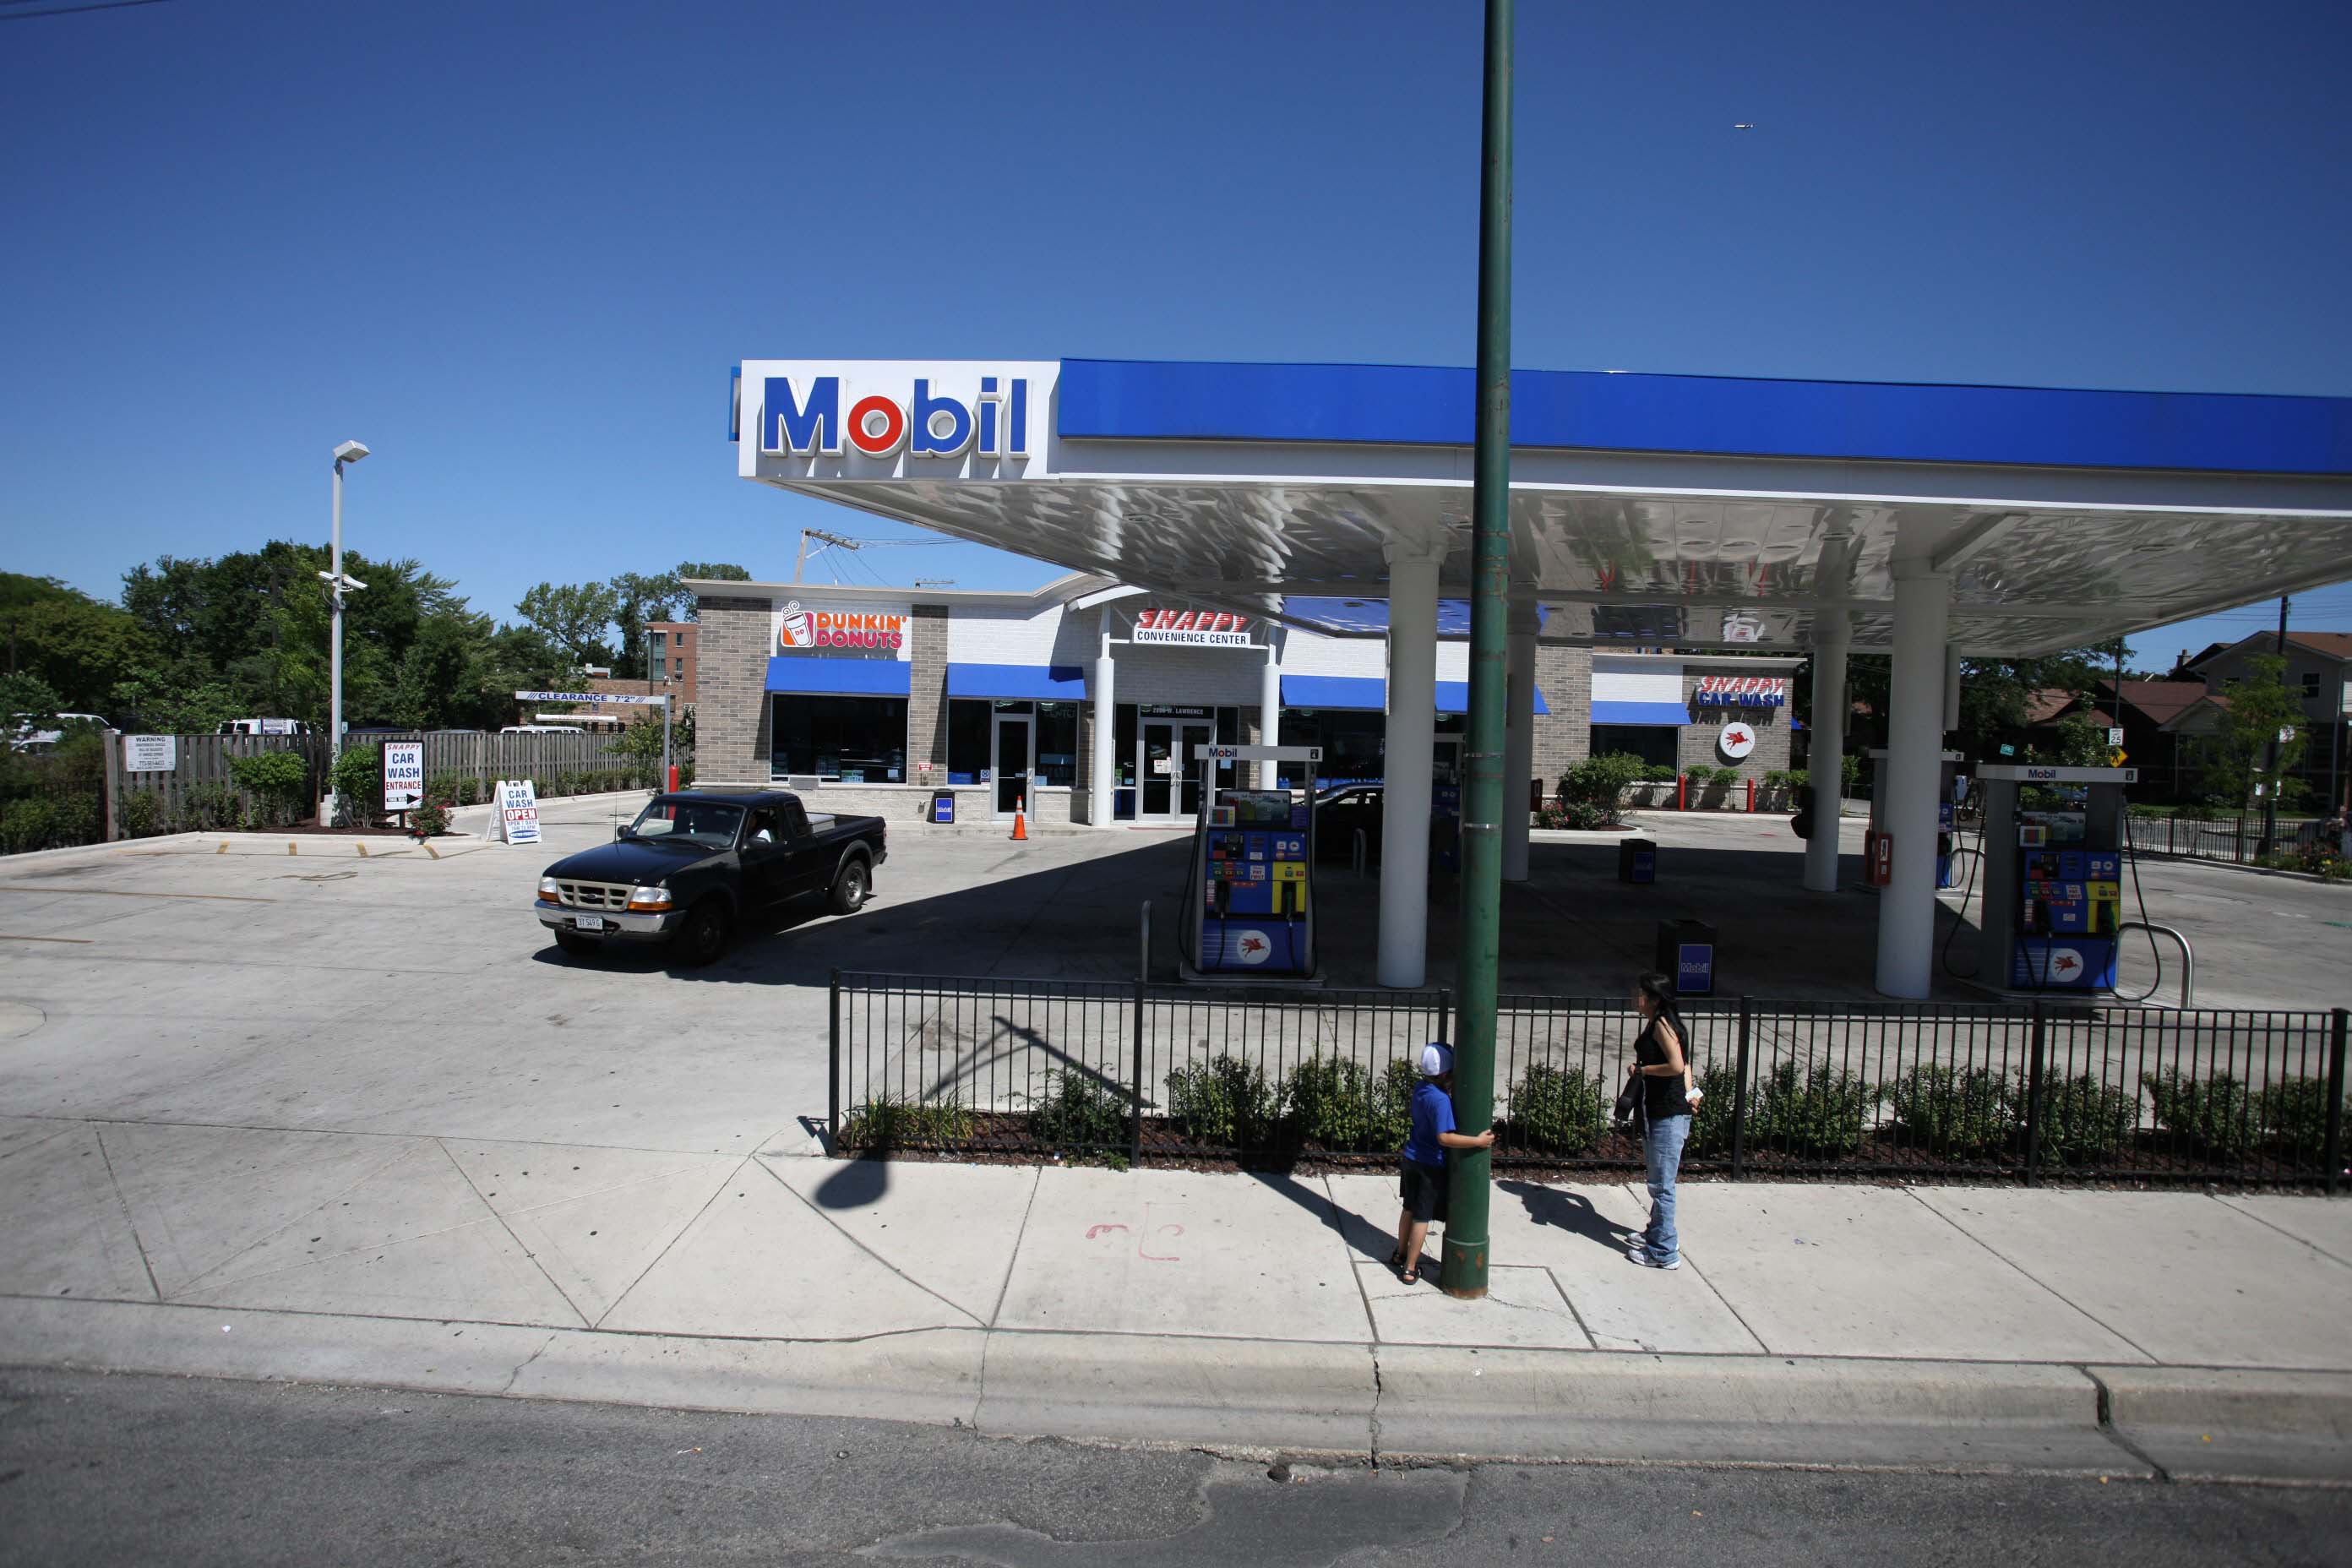 Mobil Gas Station Chicago Illinois West Lawrence Avenue 2800